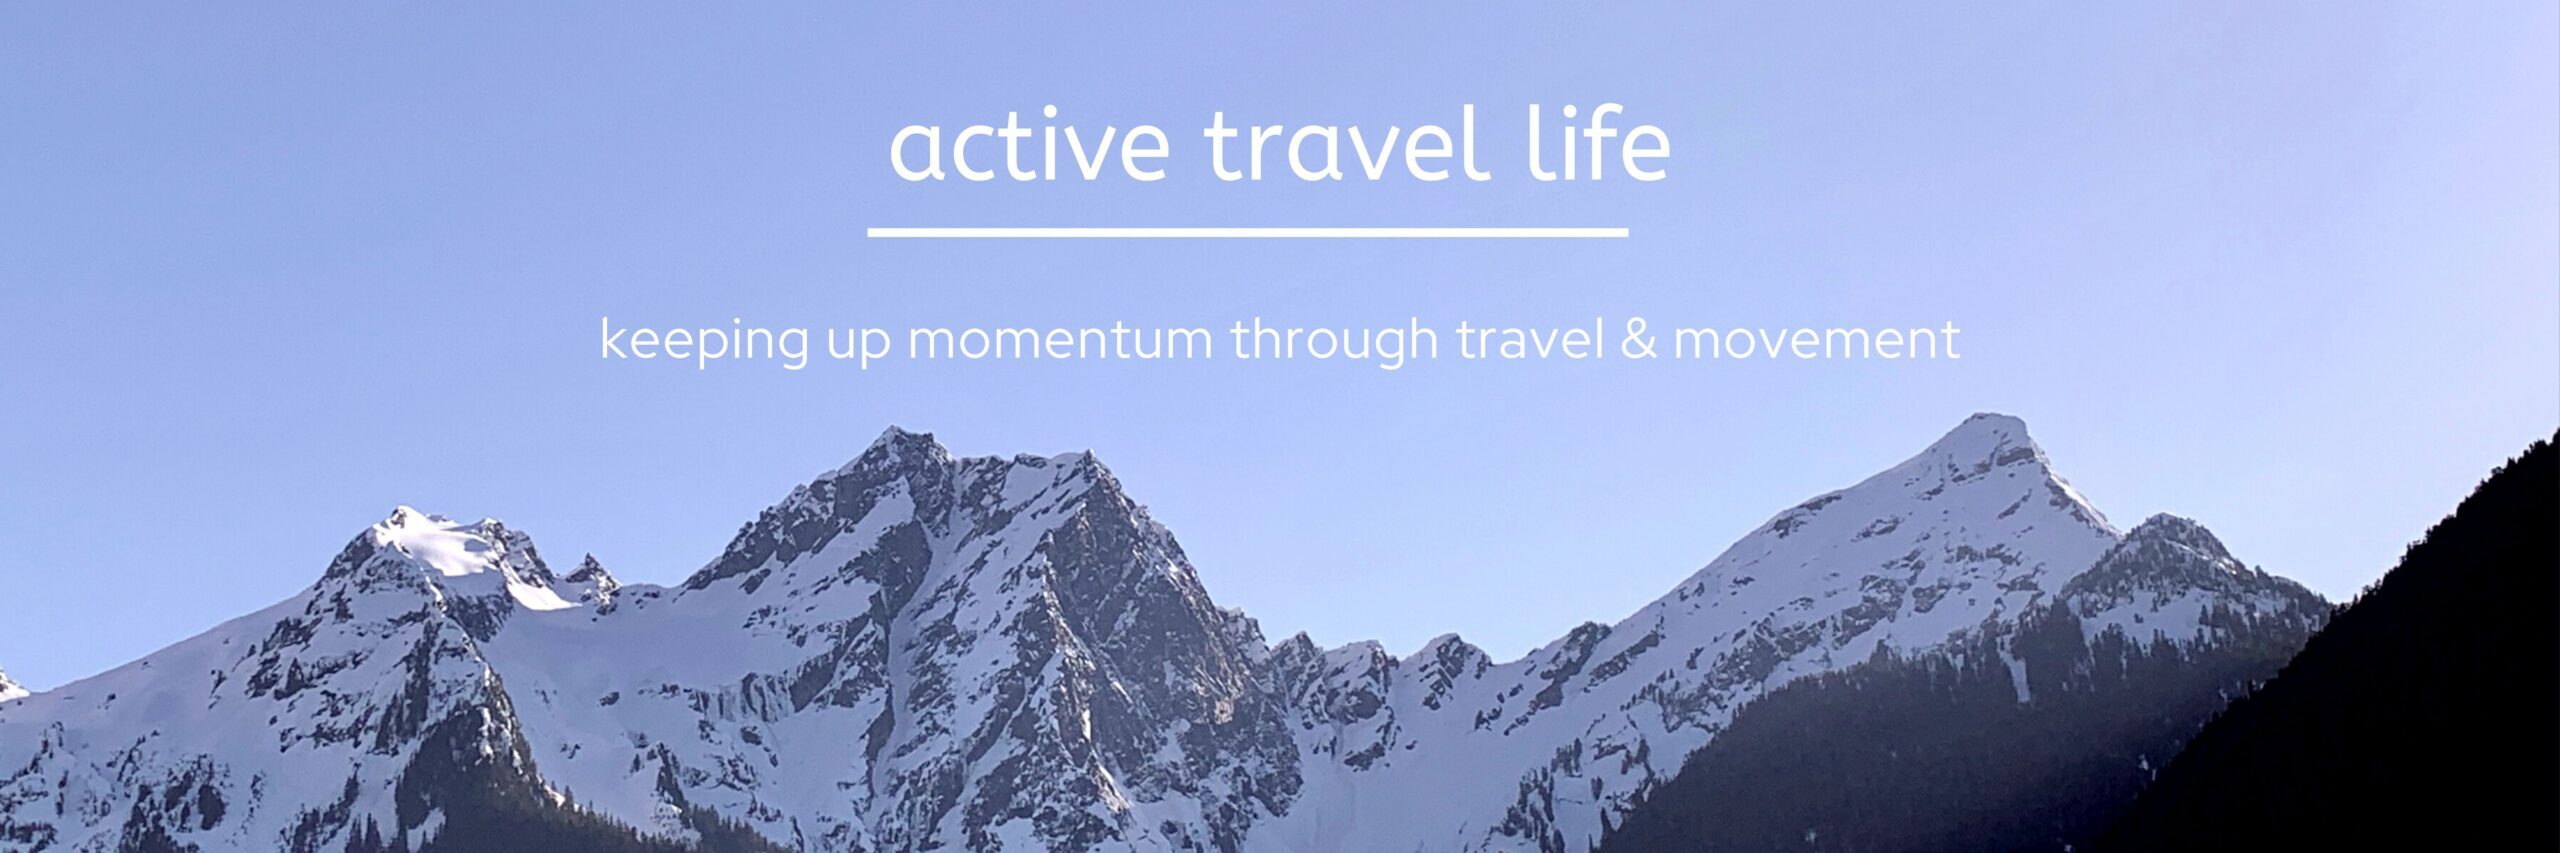 Active Travel Life heading image featuring rocky mountains